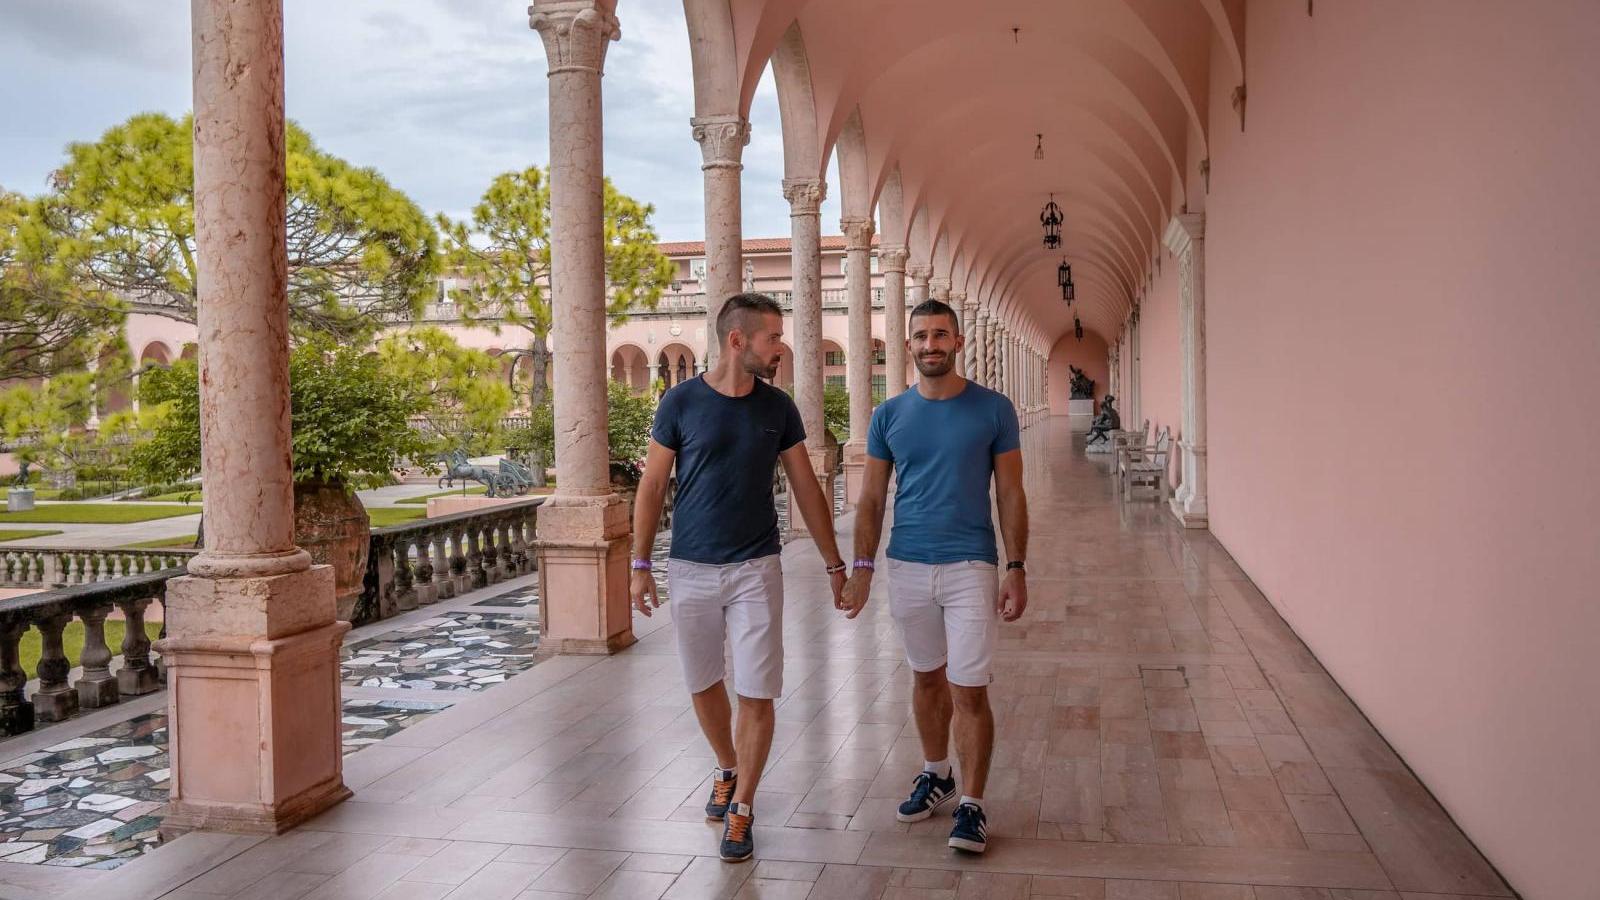 Taking a stroll through the gardens of the Ringling Complex